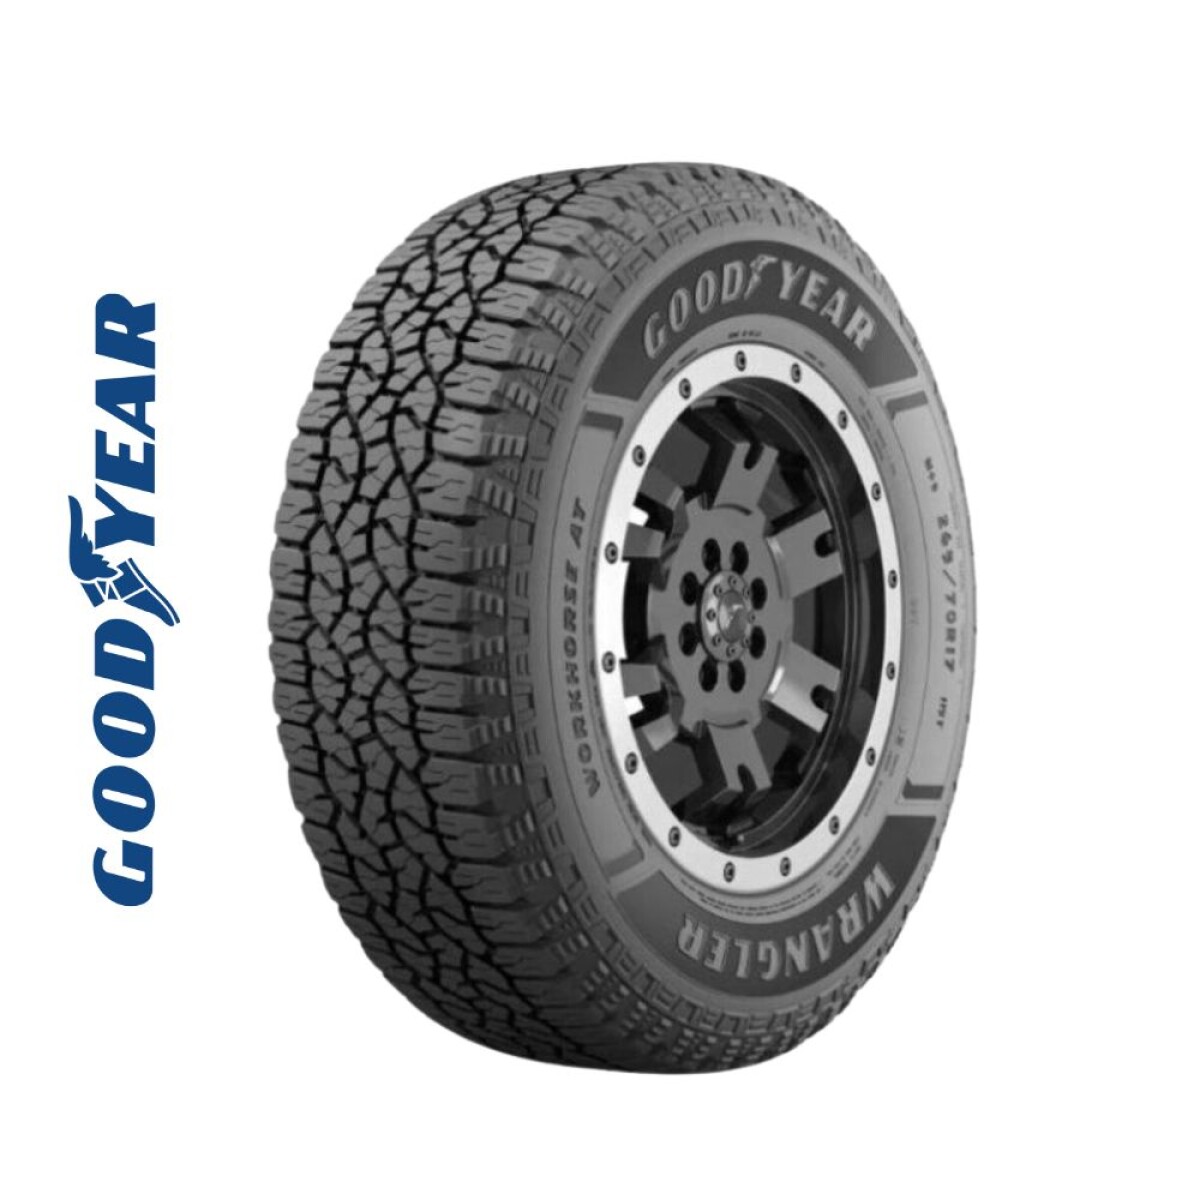 255/70 R16 WRANGLER WORKHORSE AT 115T GOODYEAR 